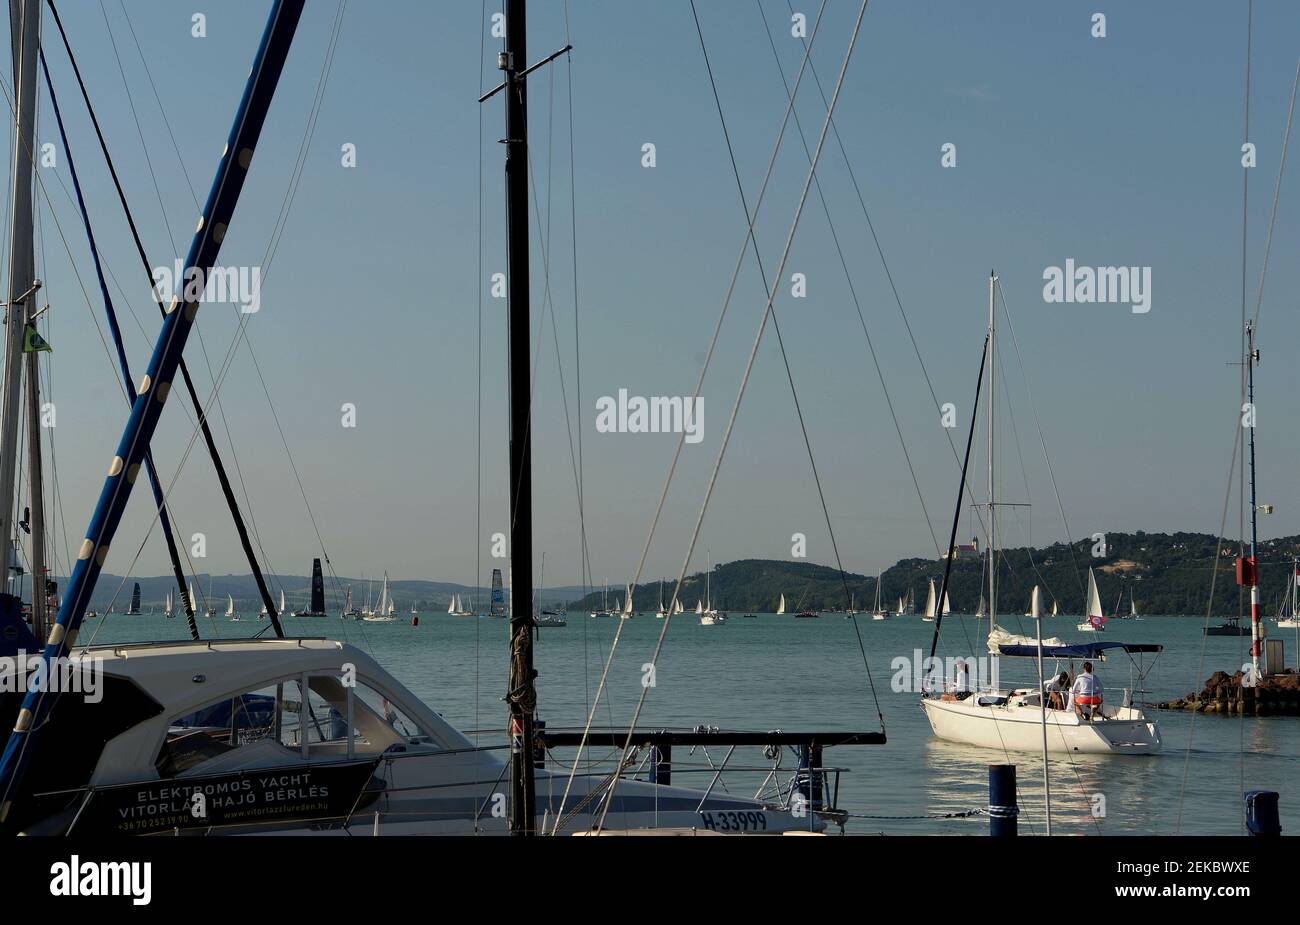 View of the Blue Ribbon - Round the Lake Balaton Race on Lake Balaton.  Originally, the 52nd Kékszalag Regatta would have started in early July  according to the original race calendar, but